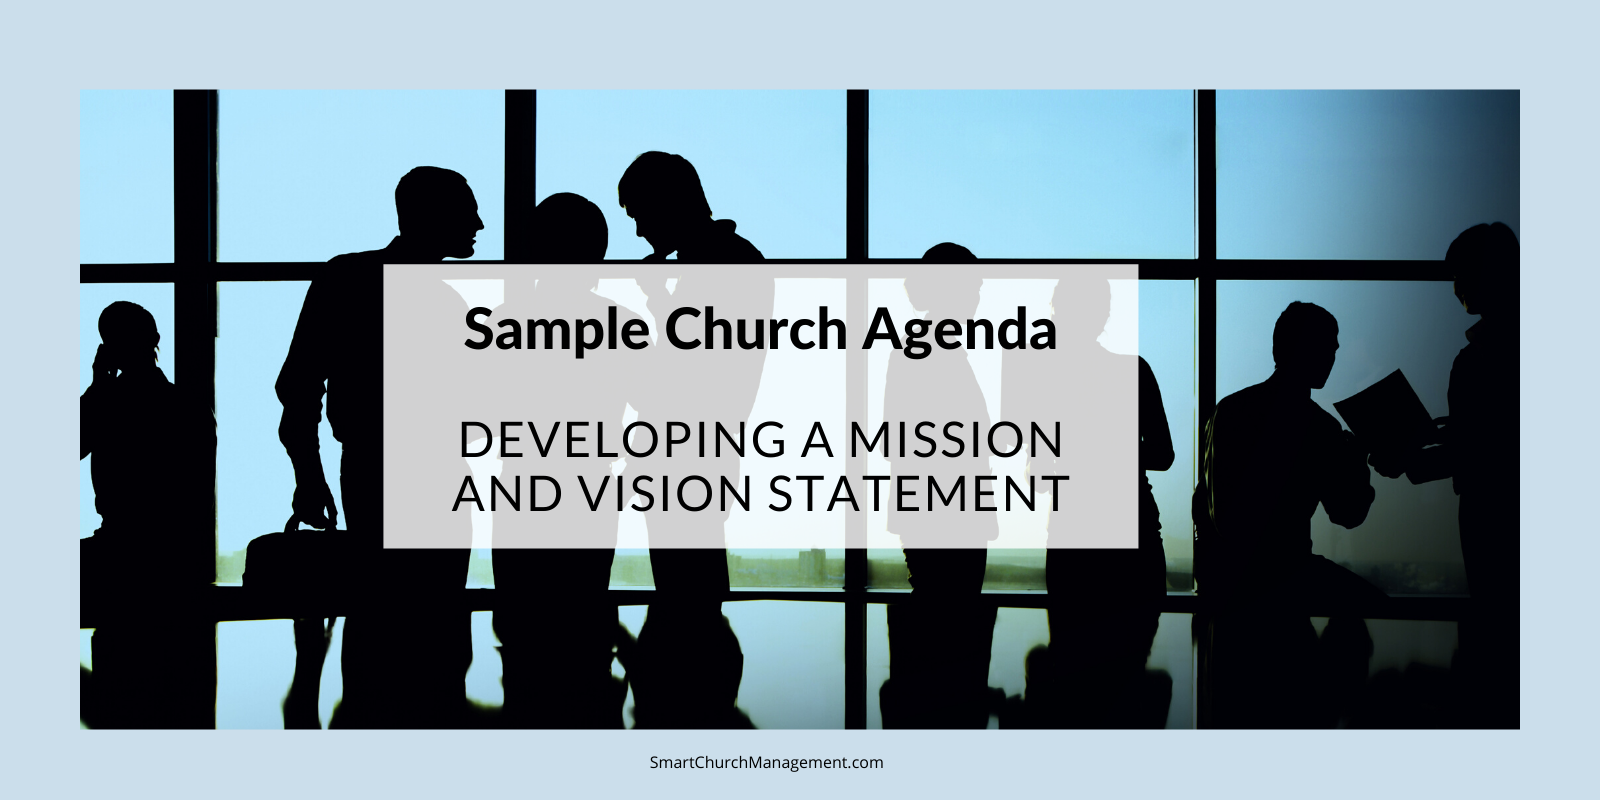 Sample Church Agenda - Developing A Mission and Vision Statement